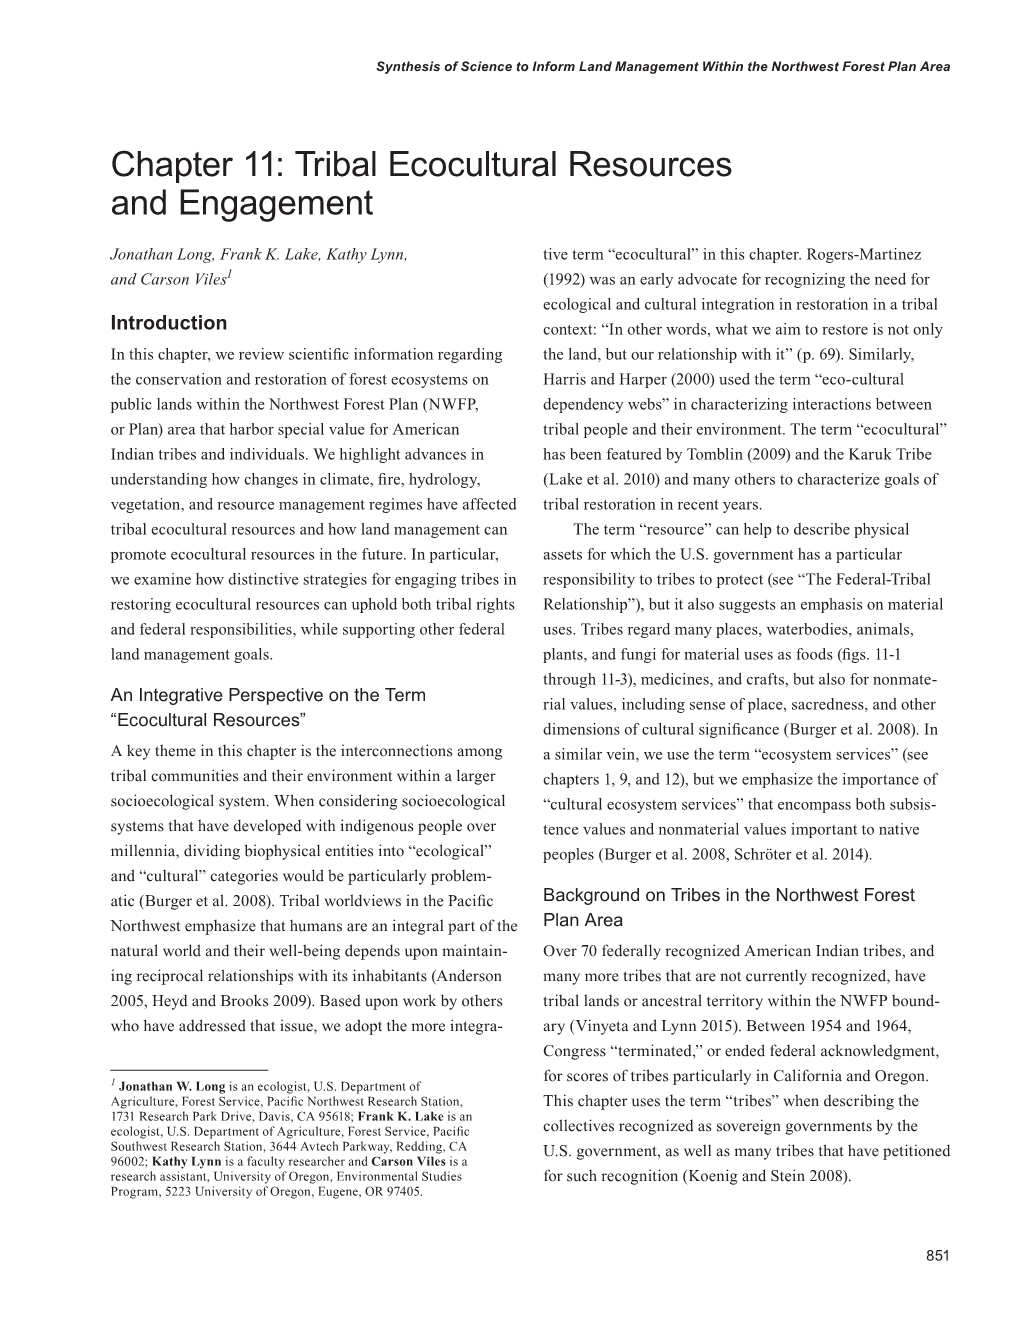 Tribal Ecocultural Resources and Engagement